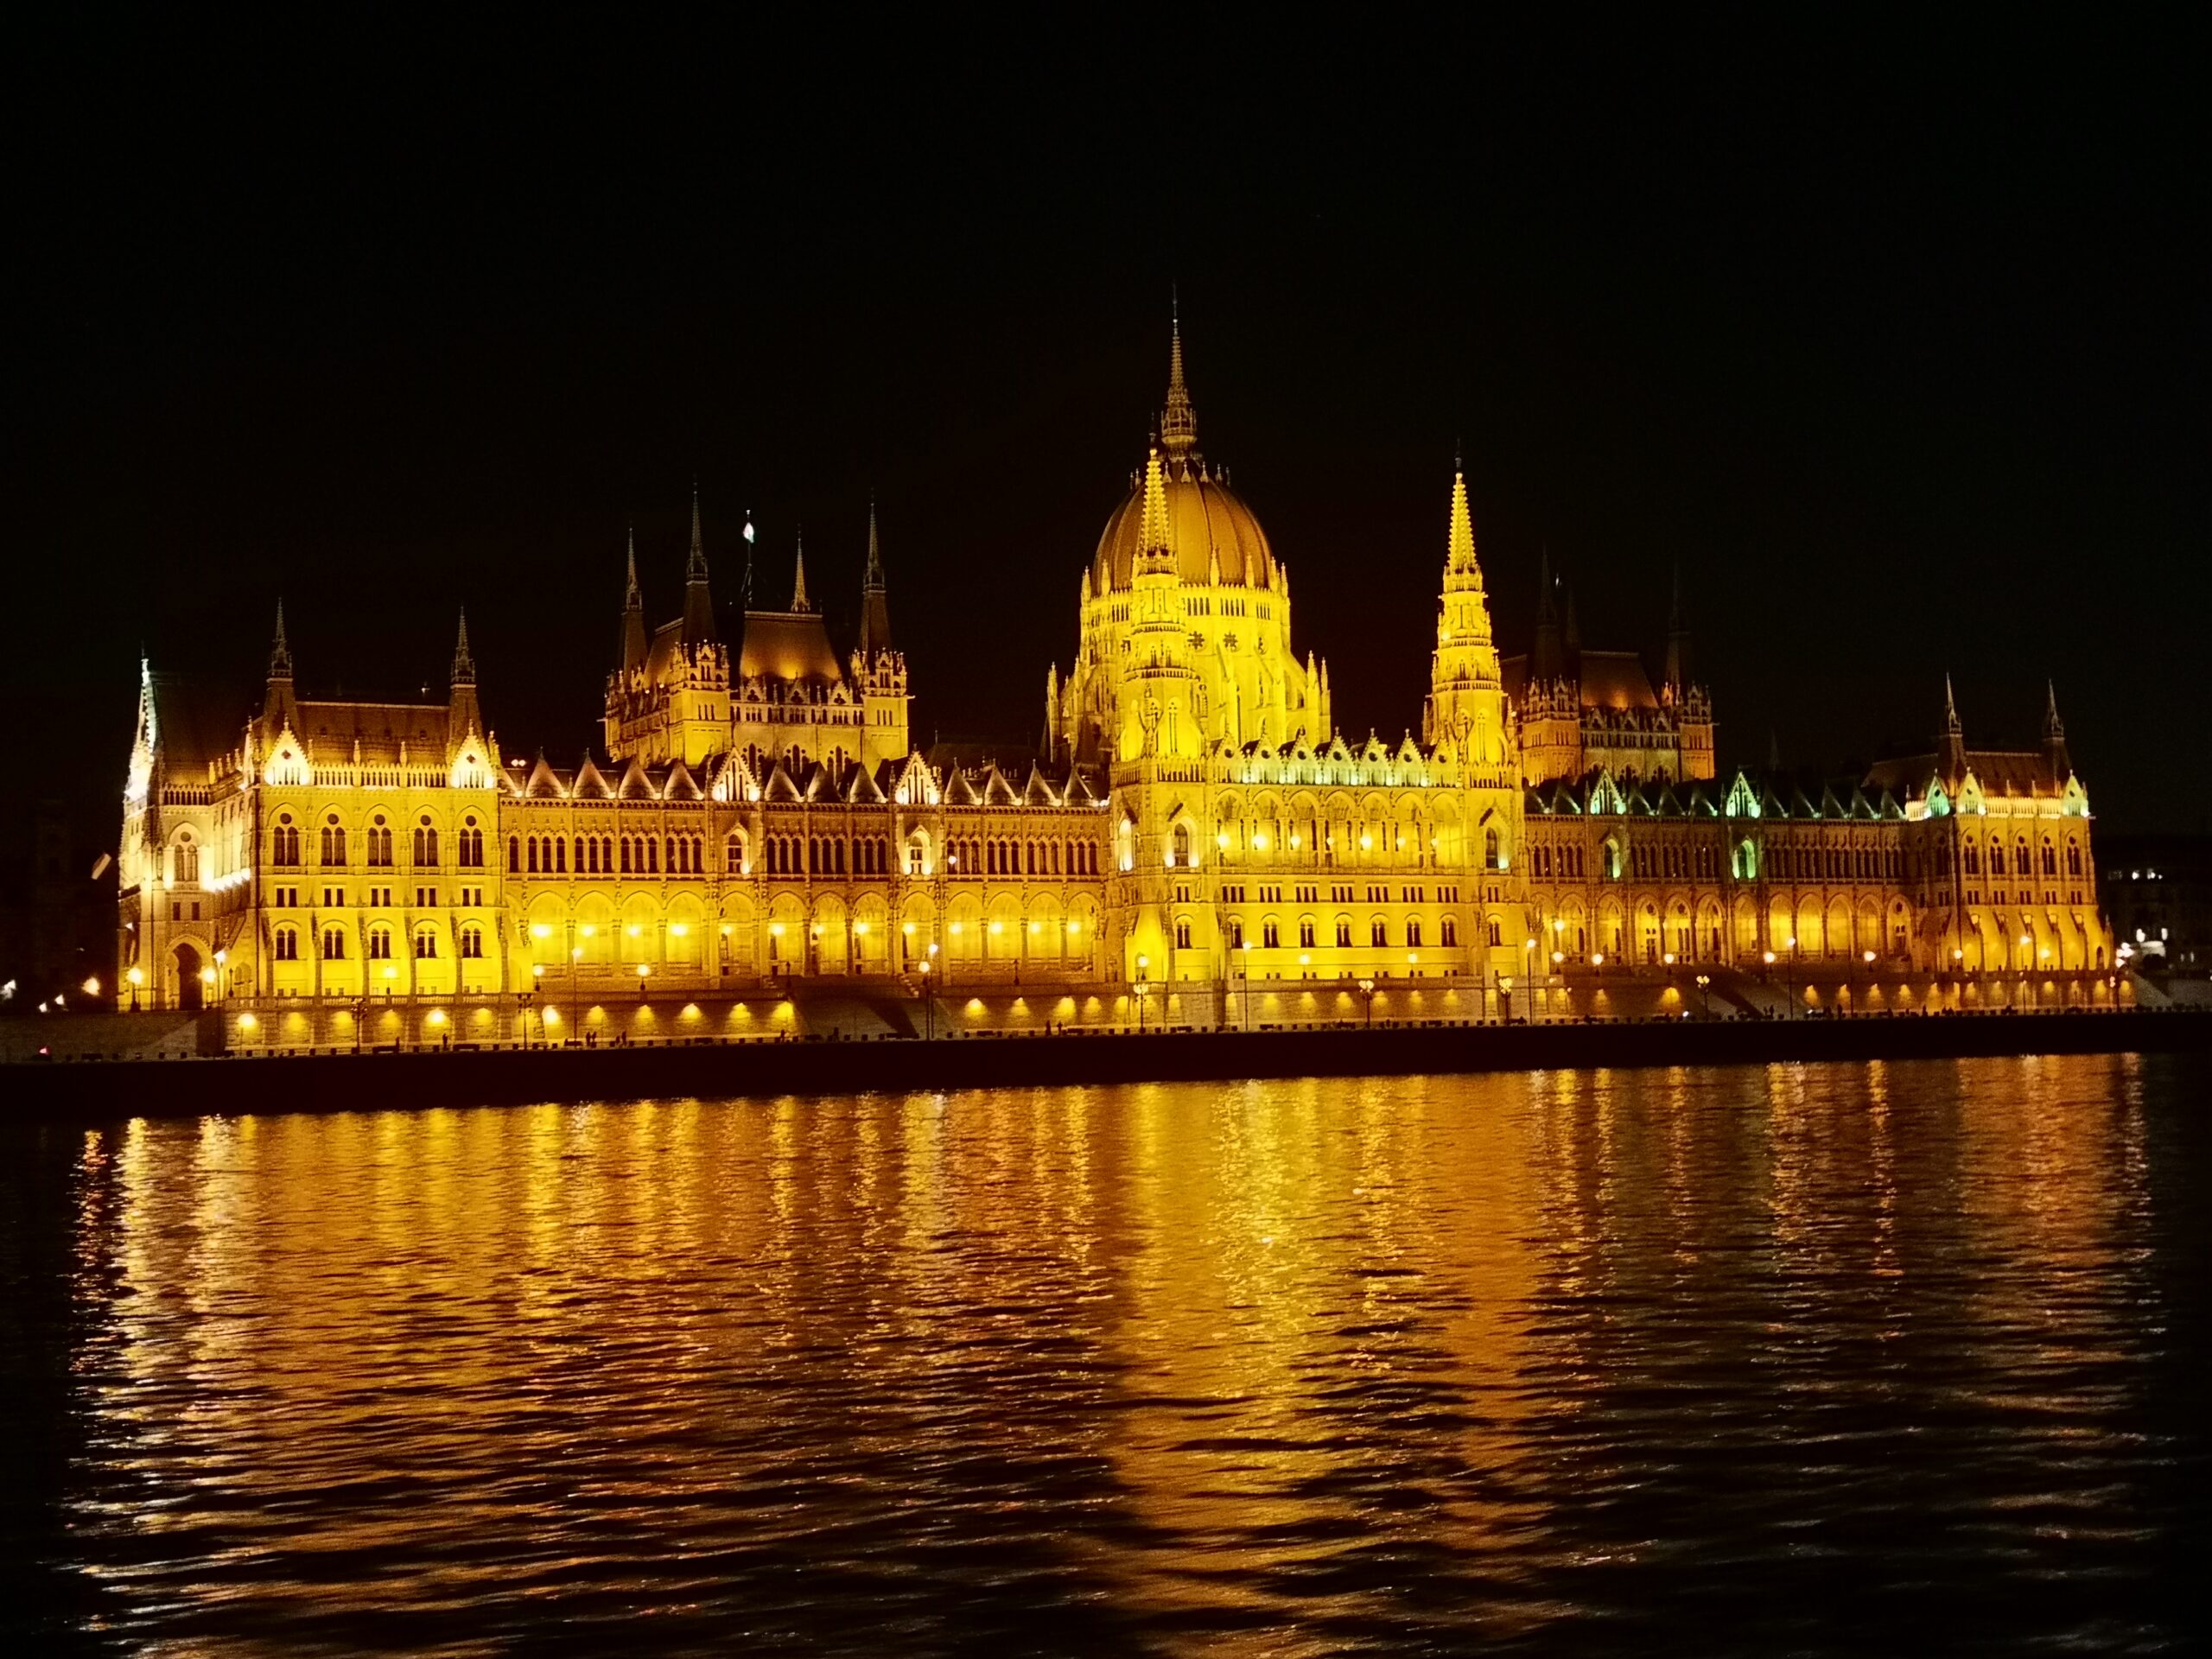 The gorgeous Hungarian Parliament Building light up with the reflection in the rippling river.